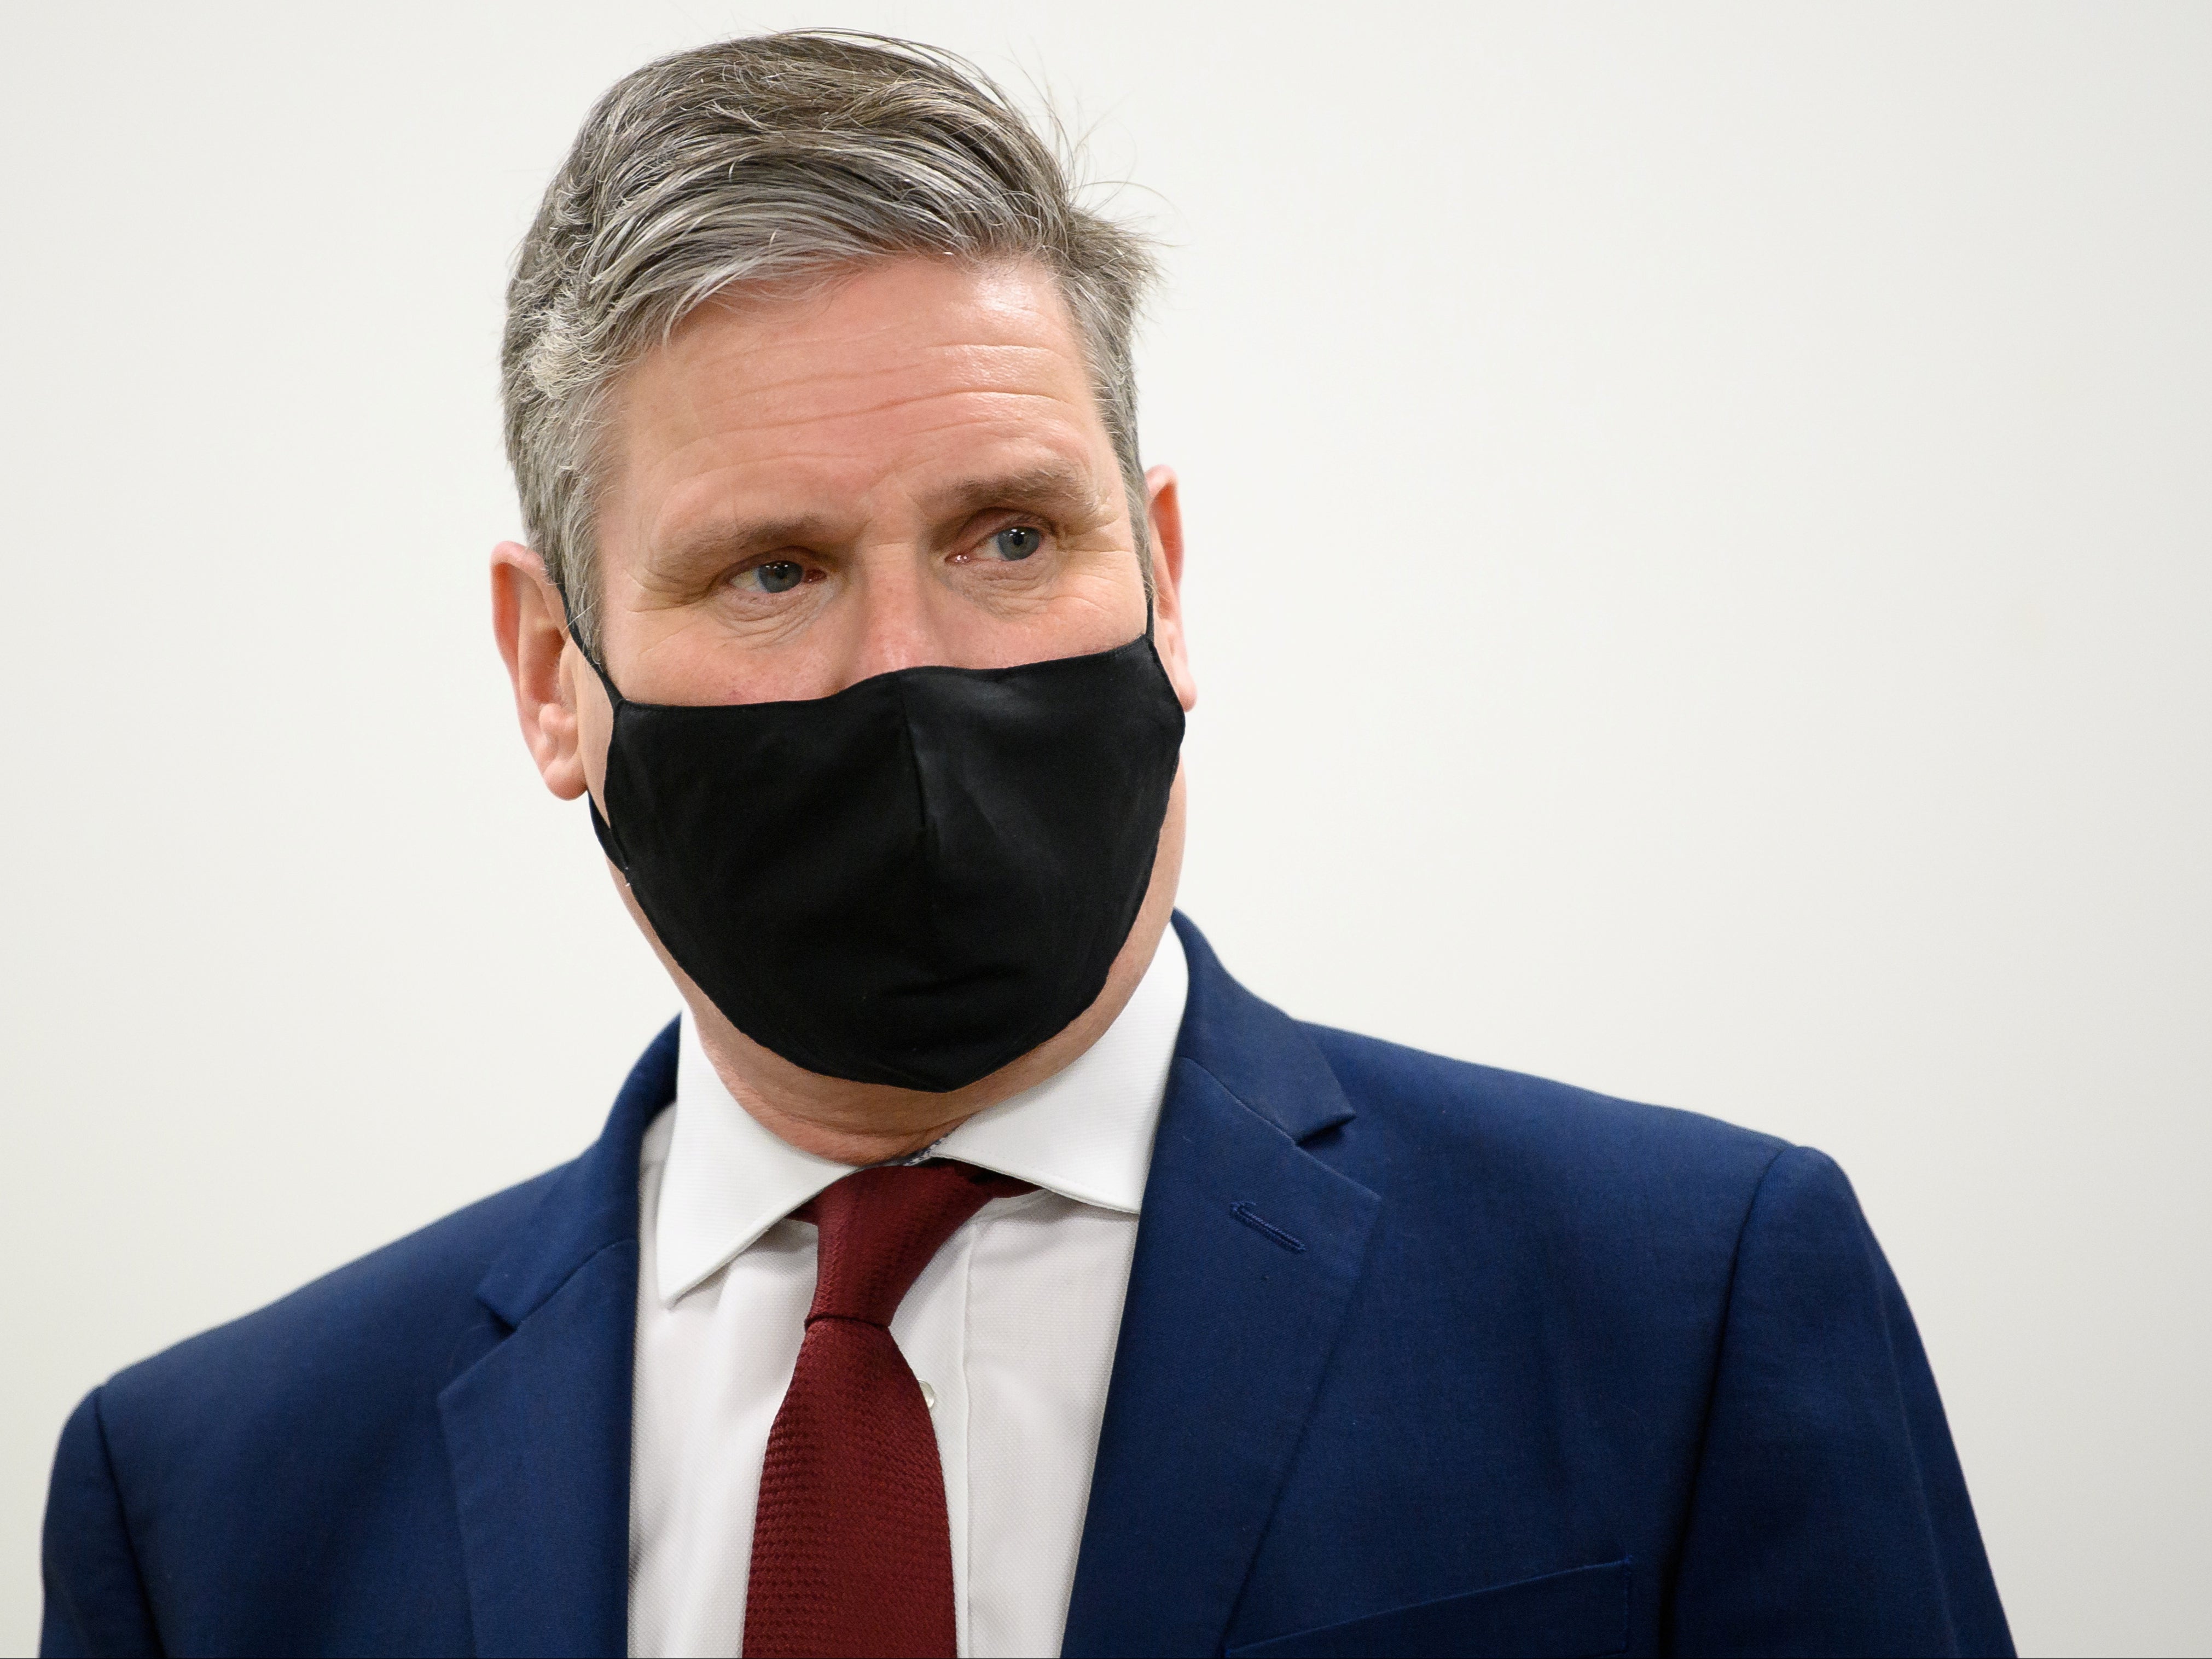 In May, we may see the real Keir Starmer unmasked